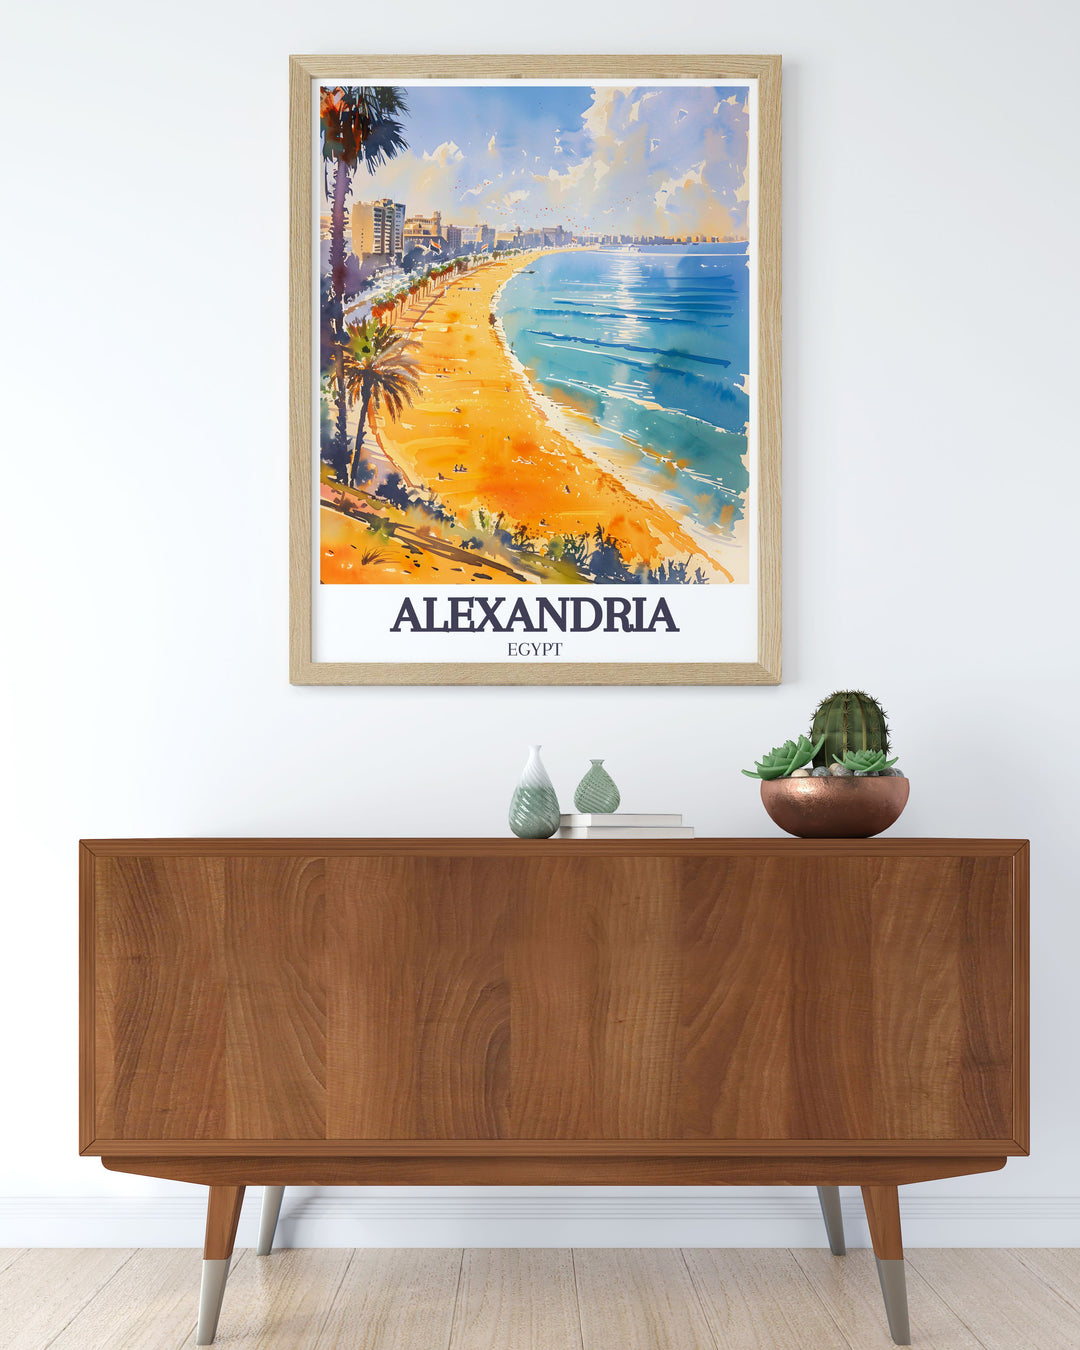 Discover the charm of Alexandria Egypt with this detailed art print featuring Stanley Beach and Corniche Promenade. This colorful city print brings the rich culture and dynamic energy of Alexandria to your home or office decor.